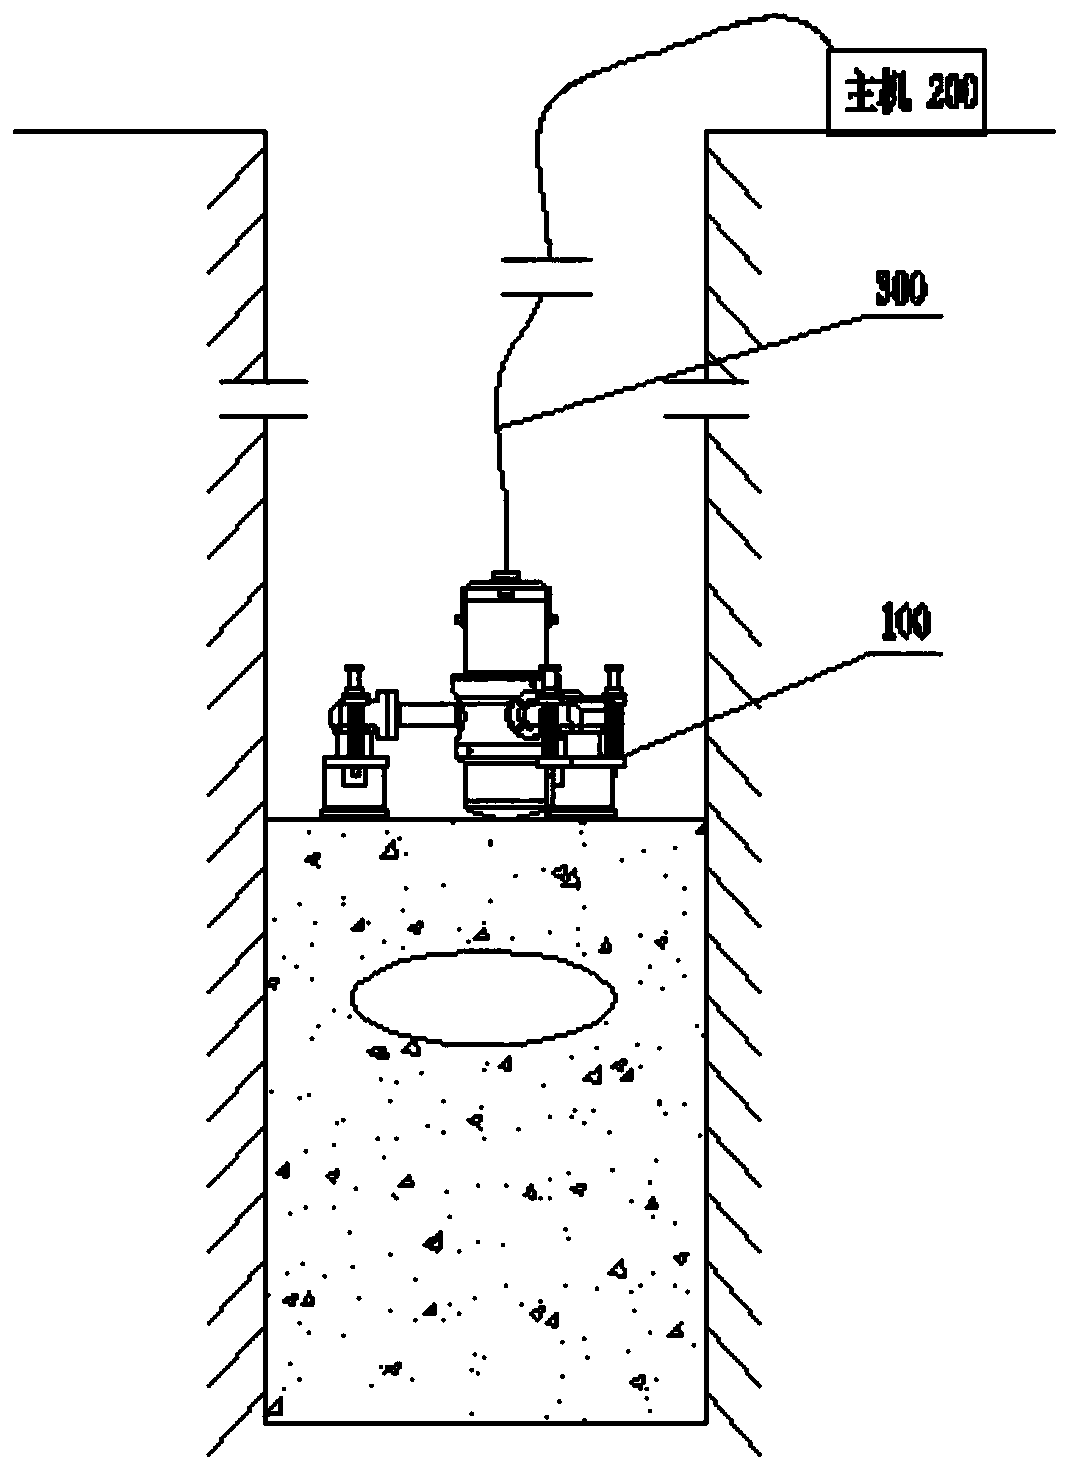 Dry and wet elastic wave hole bottom cave and subterranean cavitation detection device and method